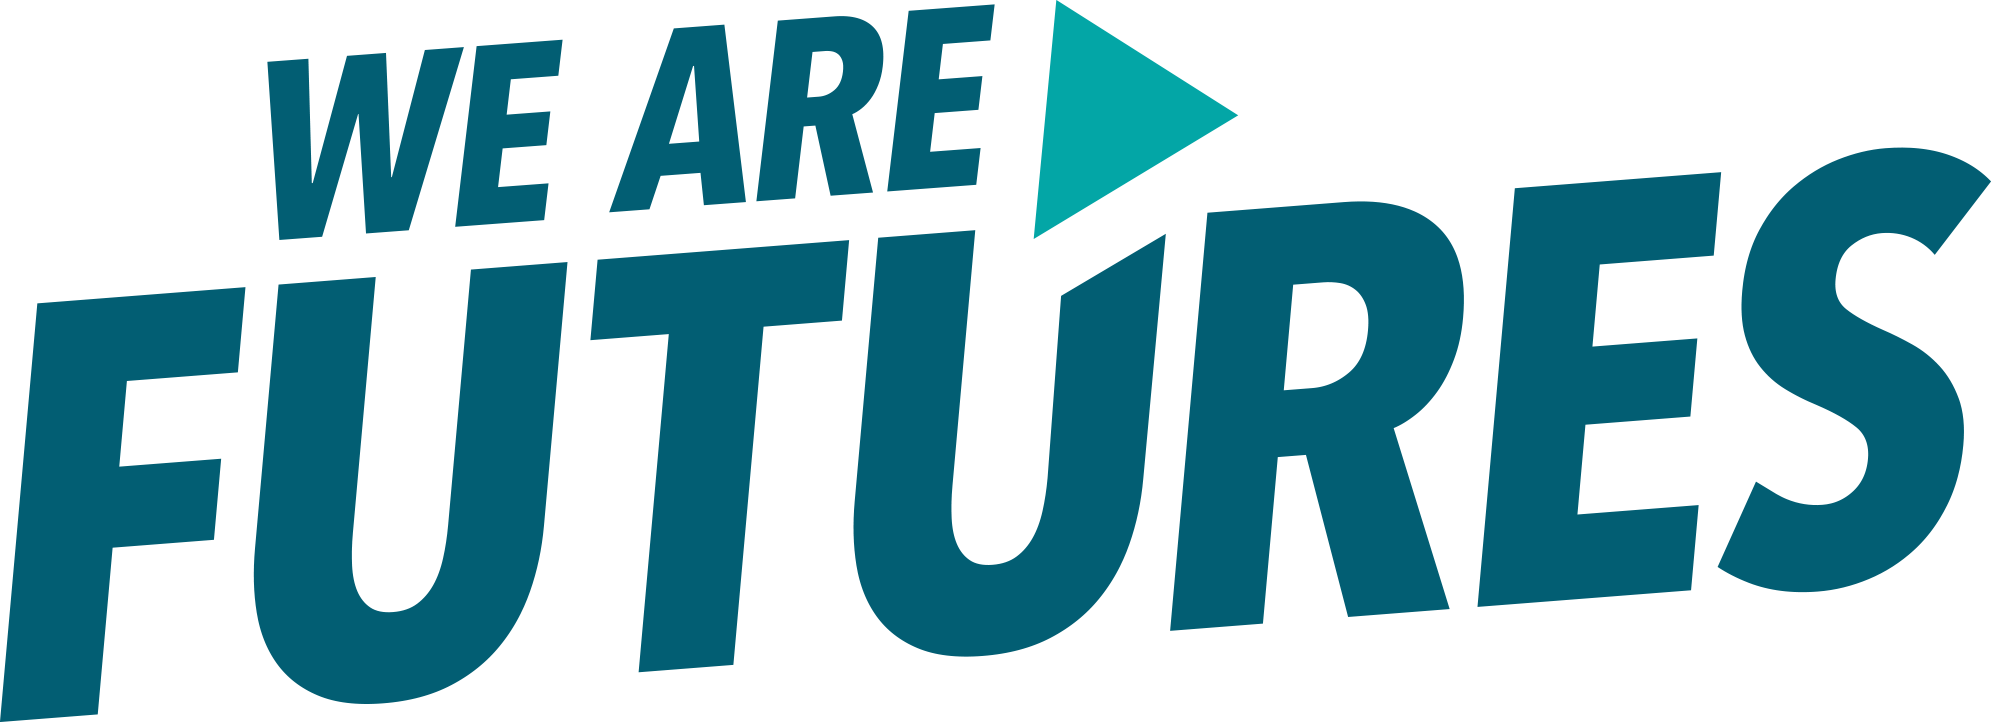 We-Are-Futures-logo.png